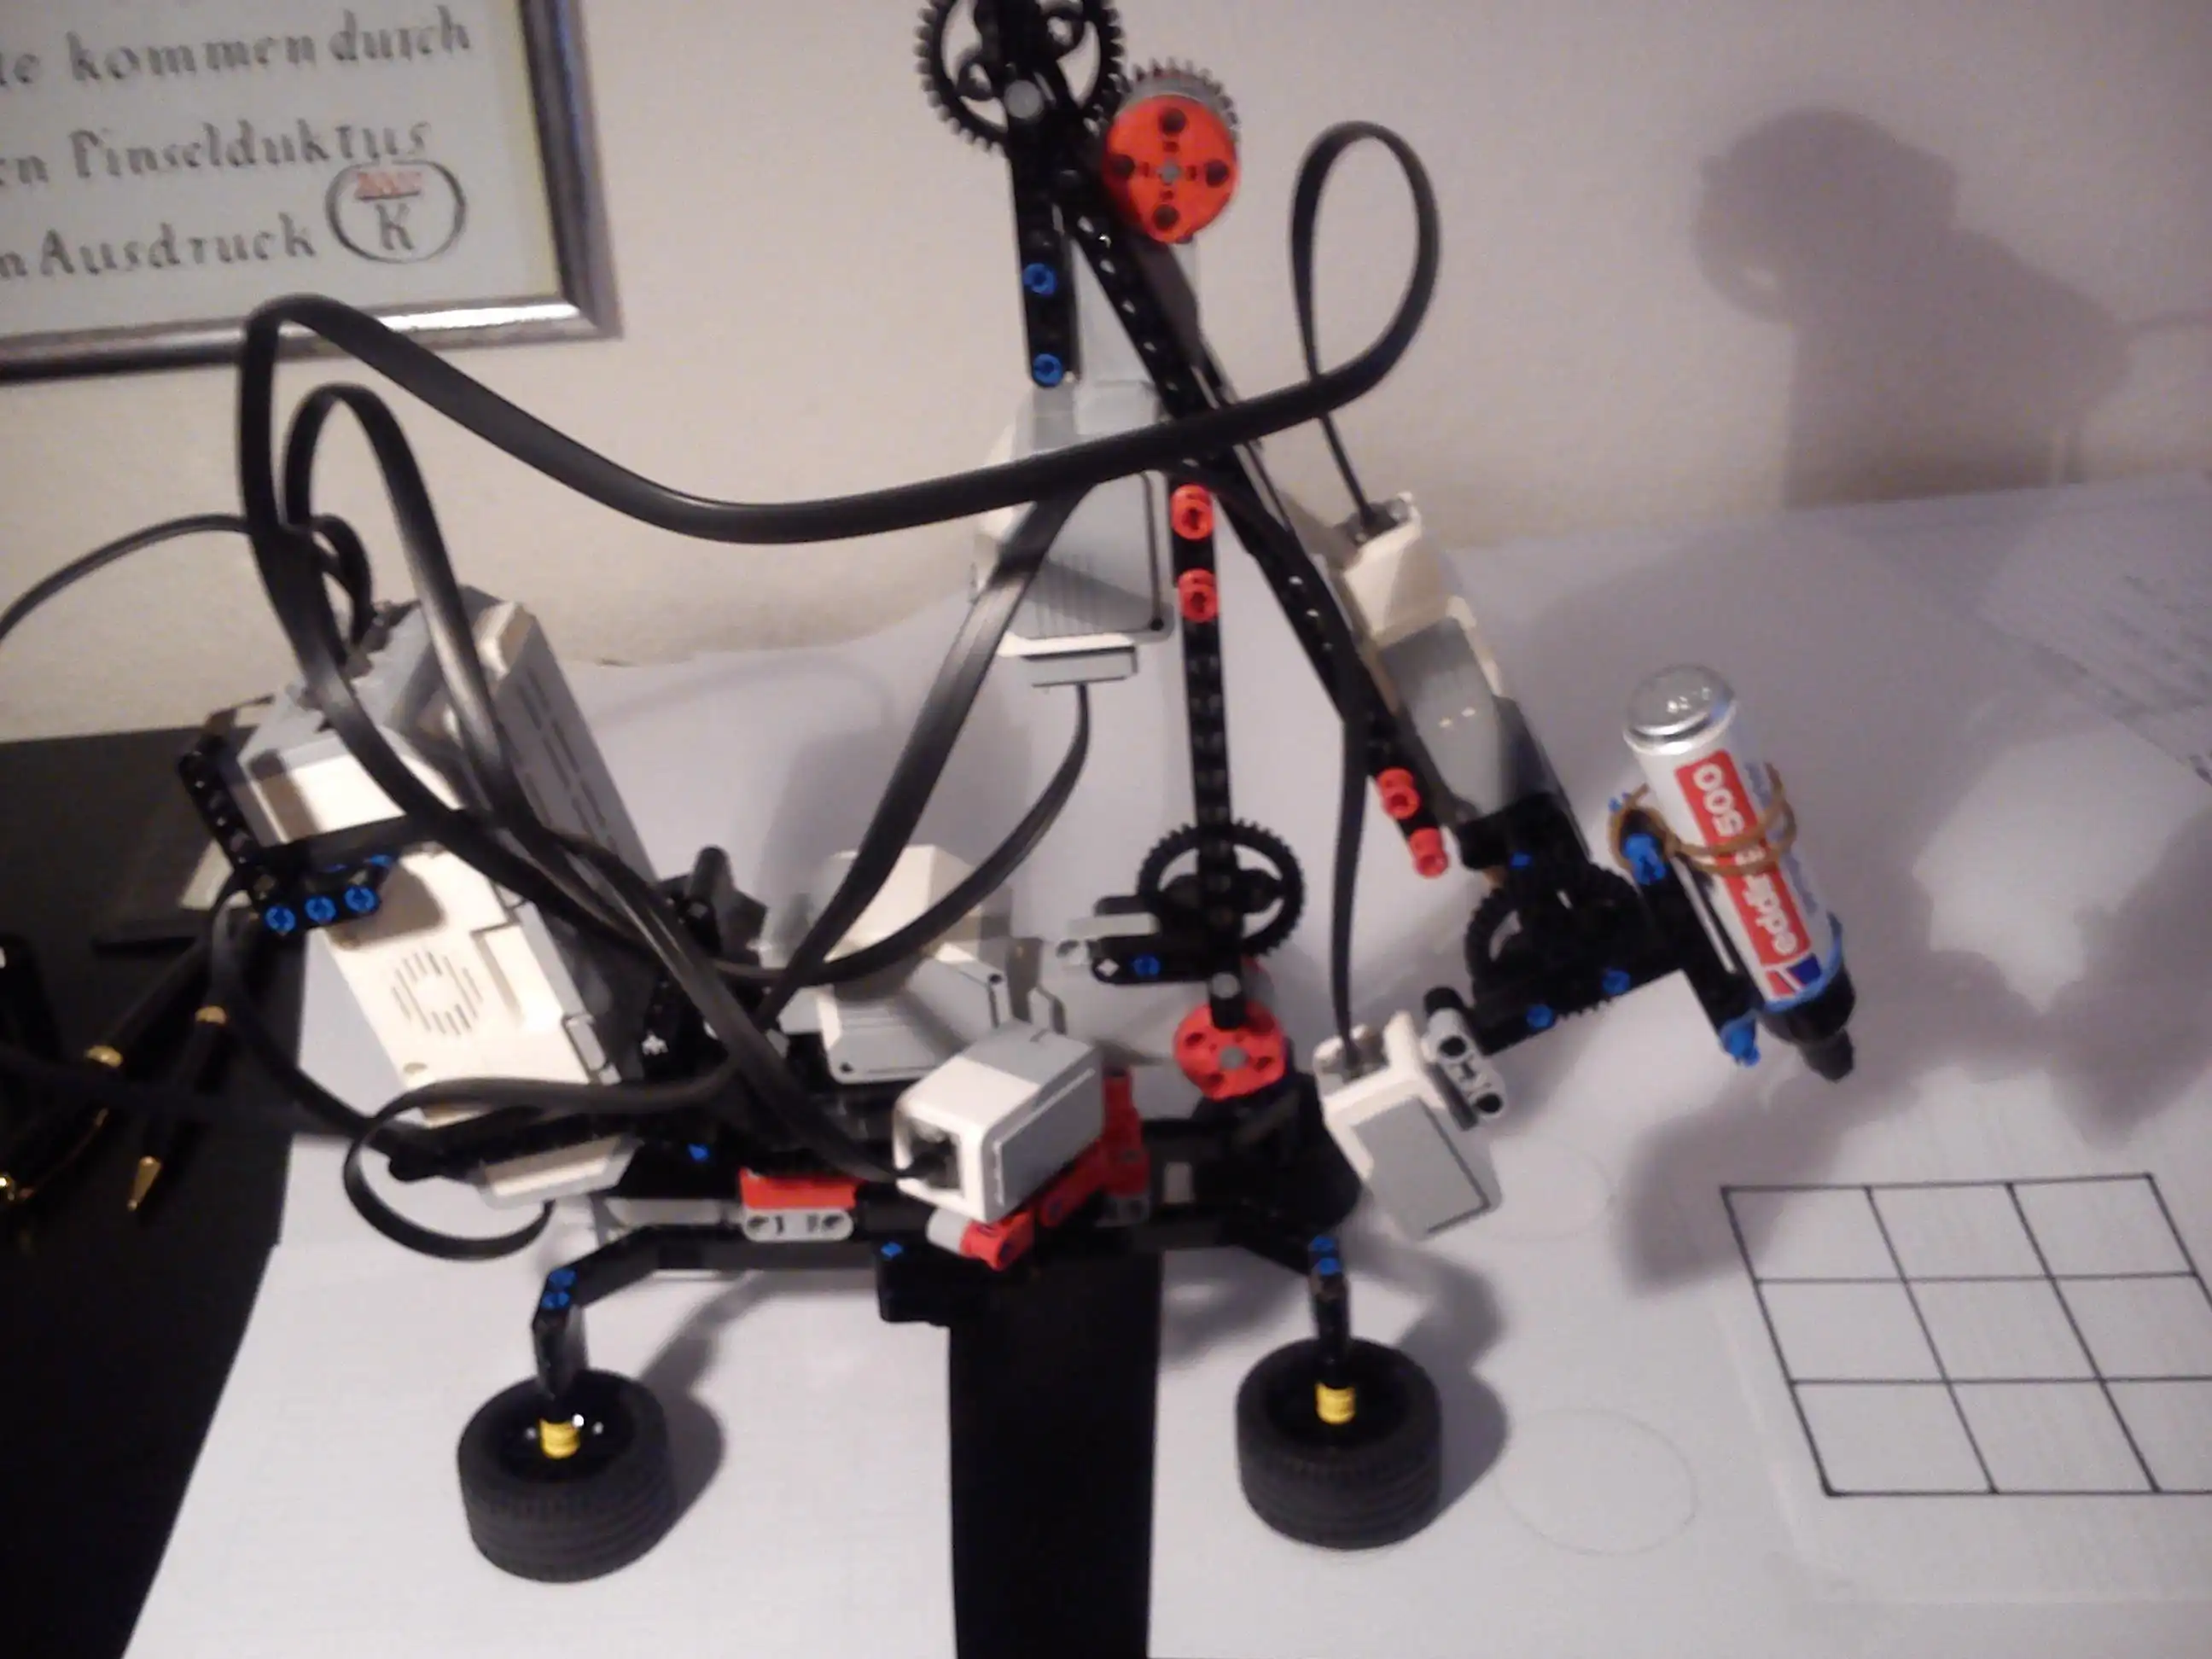 Download web tool or web app EV3 robot plays TicTacToe to run in Linux online